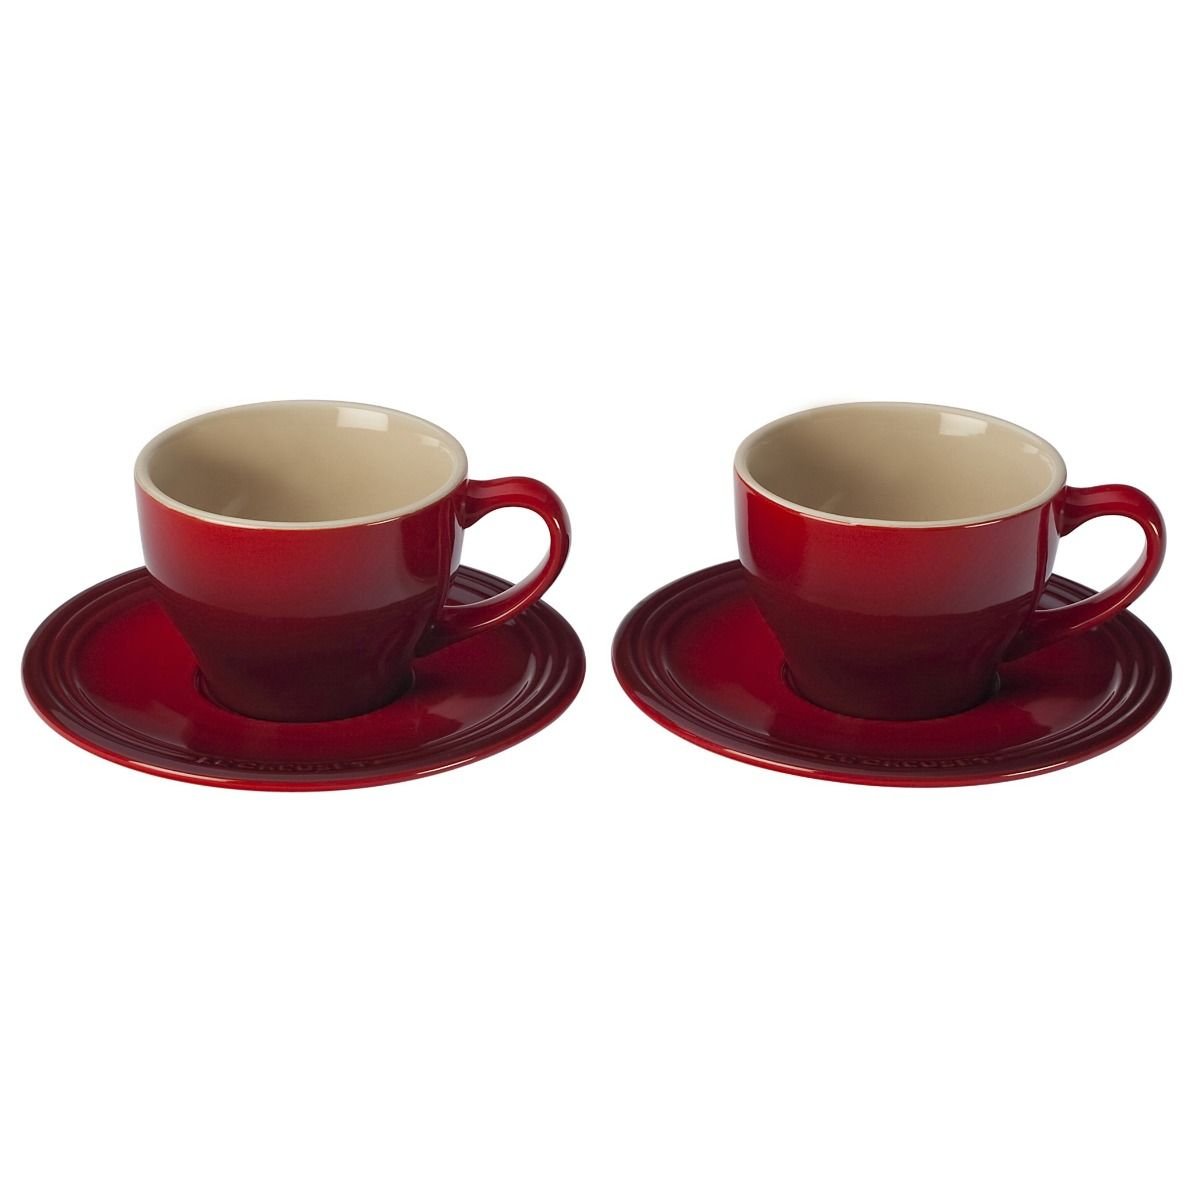 Le Creuset Giant Cappuccino Mugs Bistro Mugs Cerise Red Set of 2 NWT 